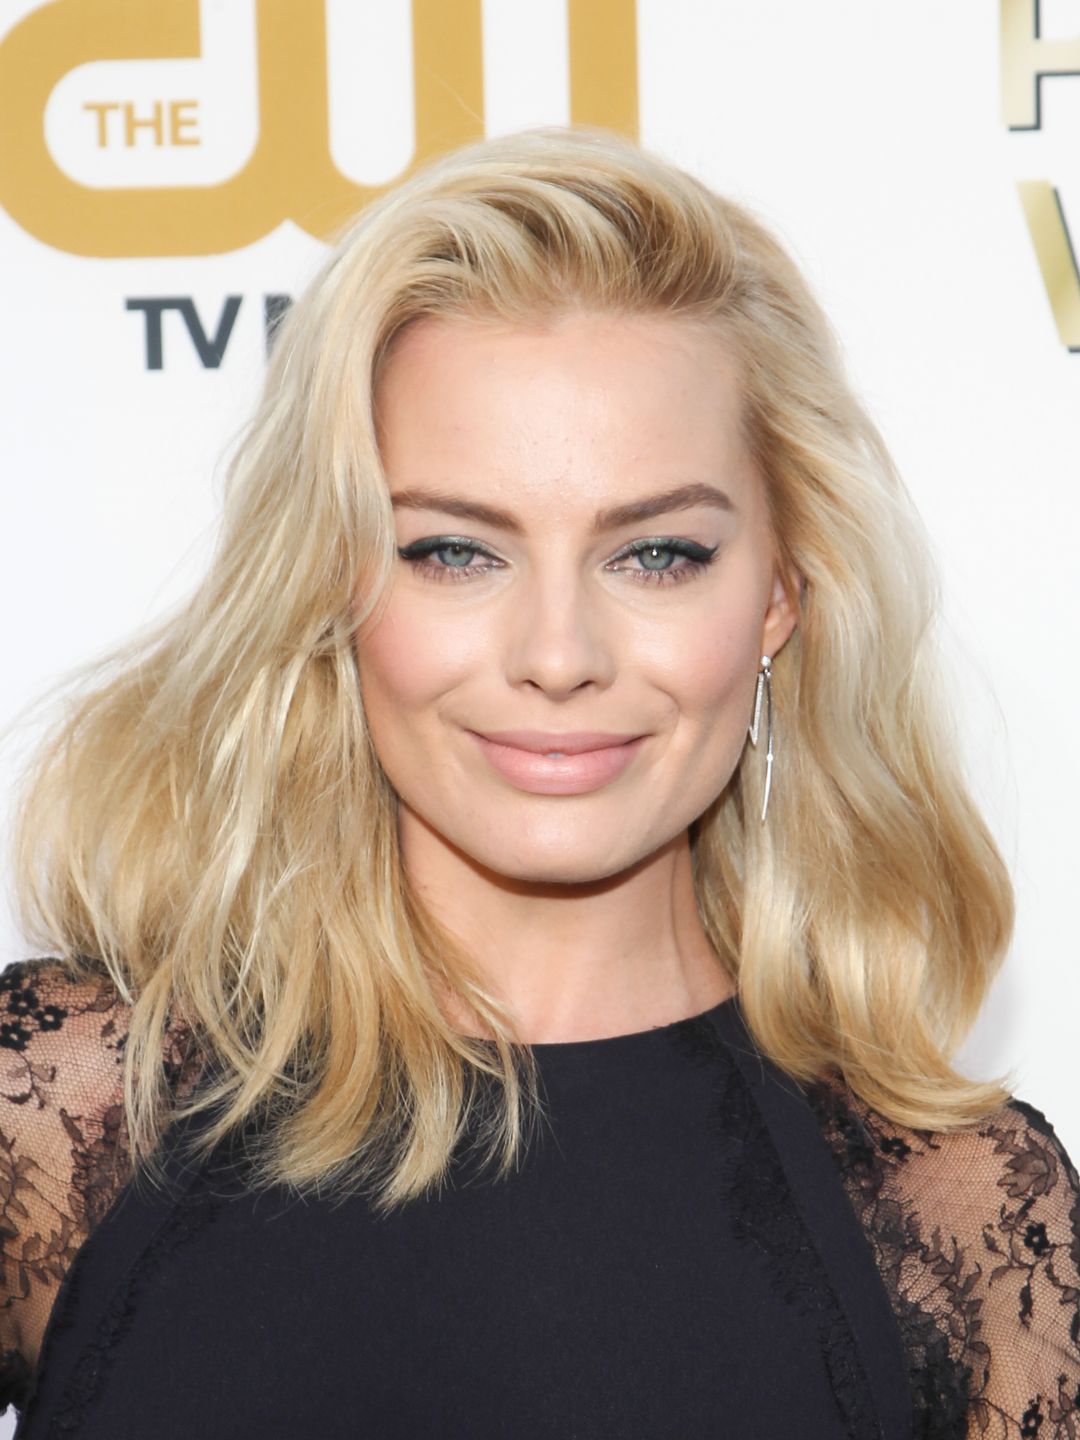 Margot Robbie who is she